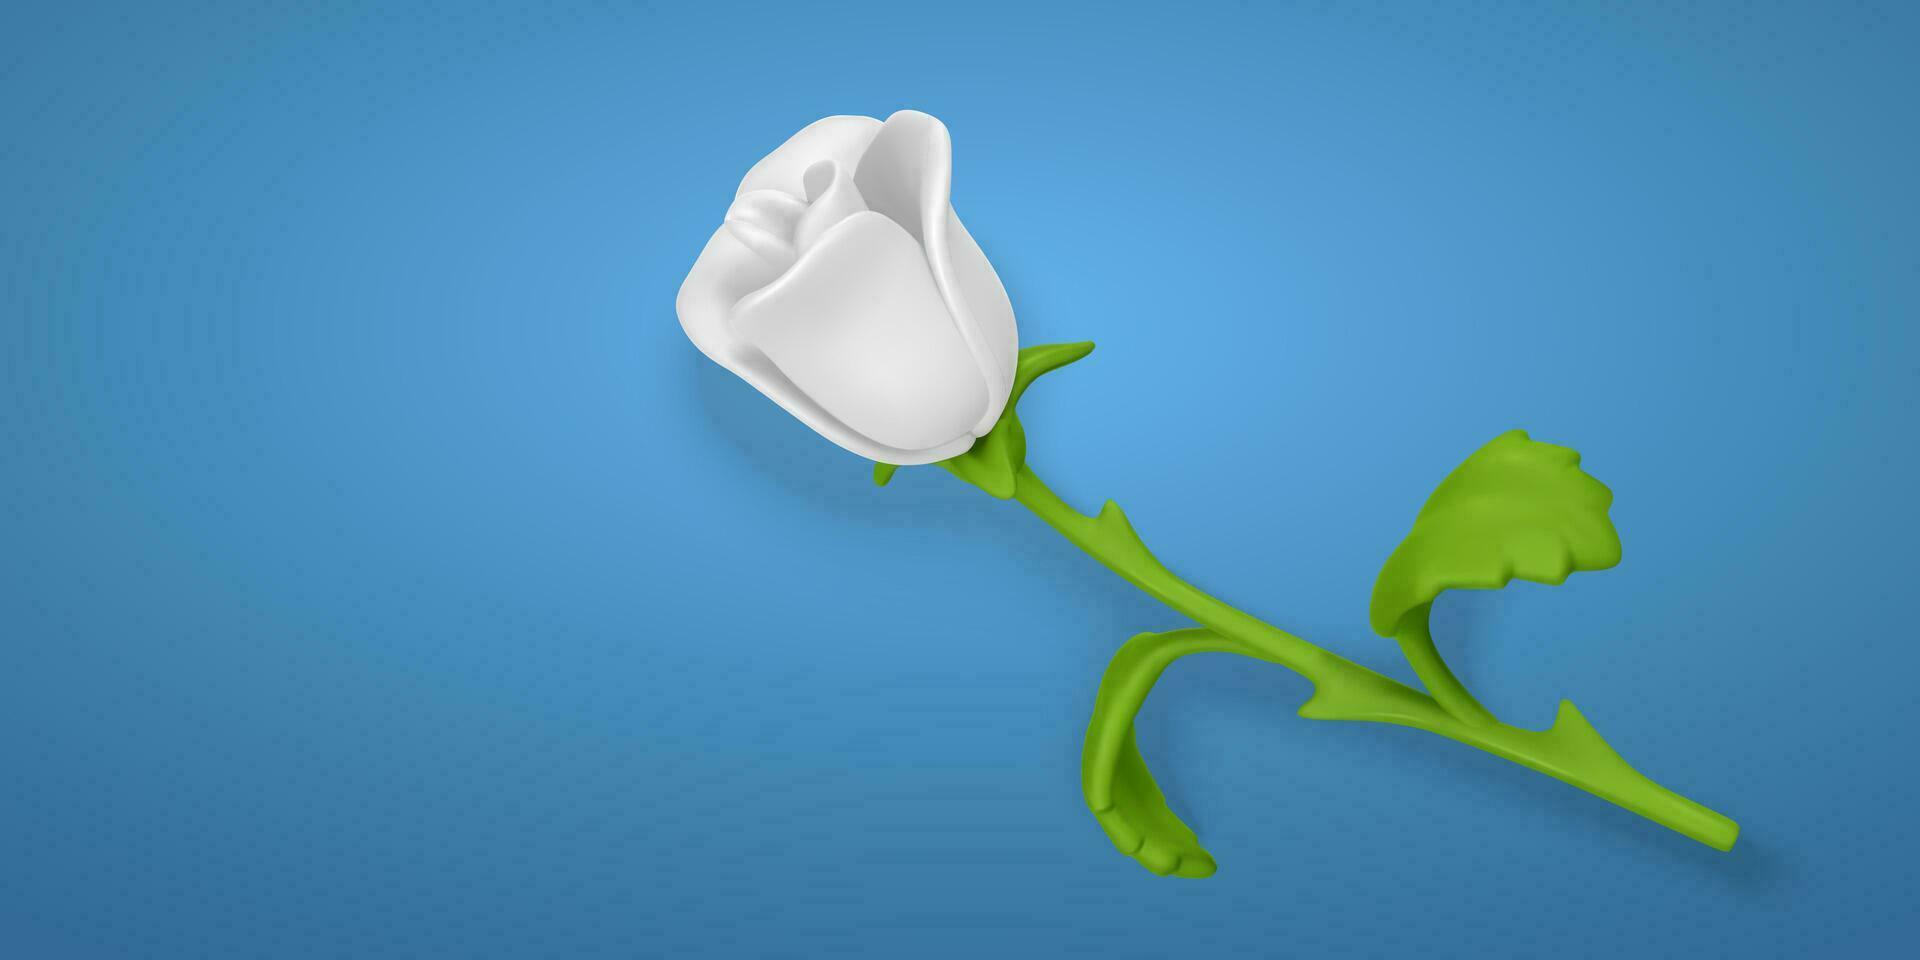 3D flower. Cute white rose in cartoon style for bouquet or decoration. Vector illustration